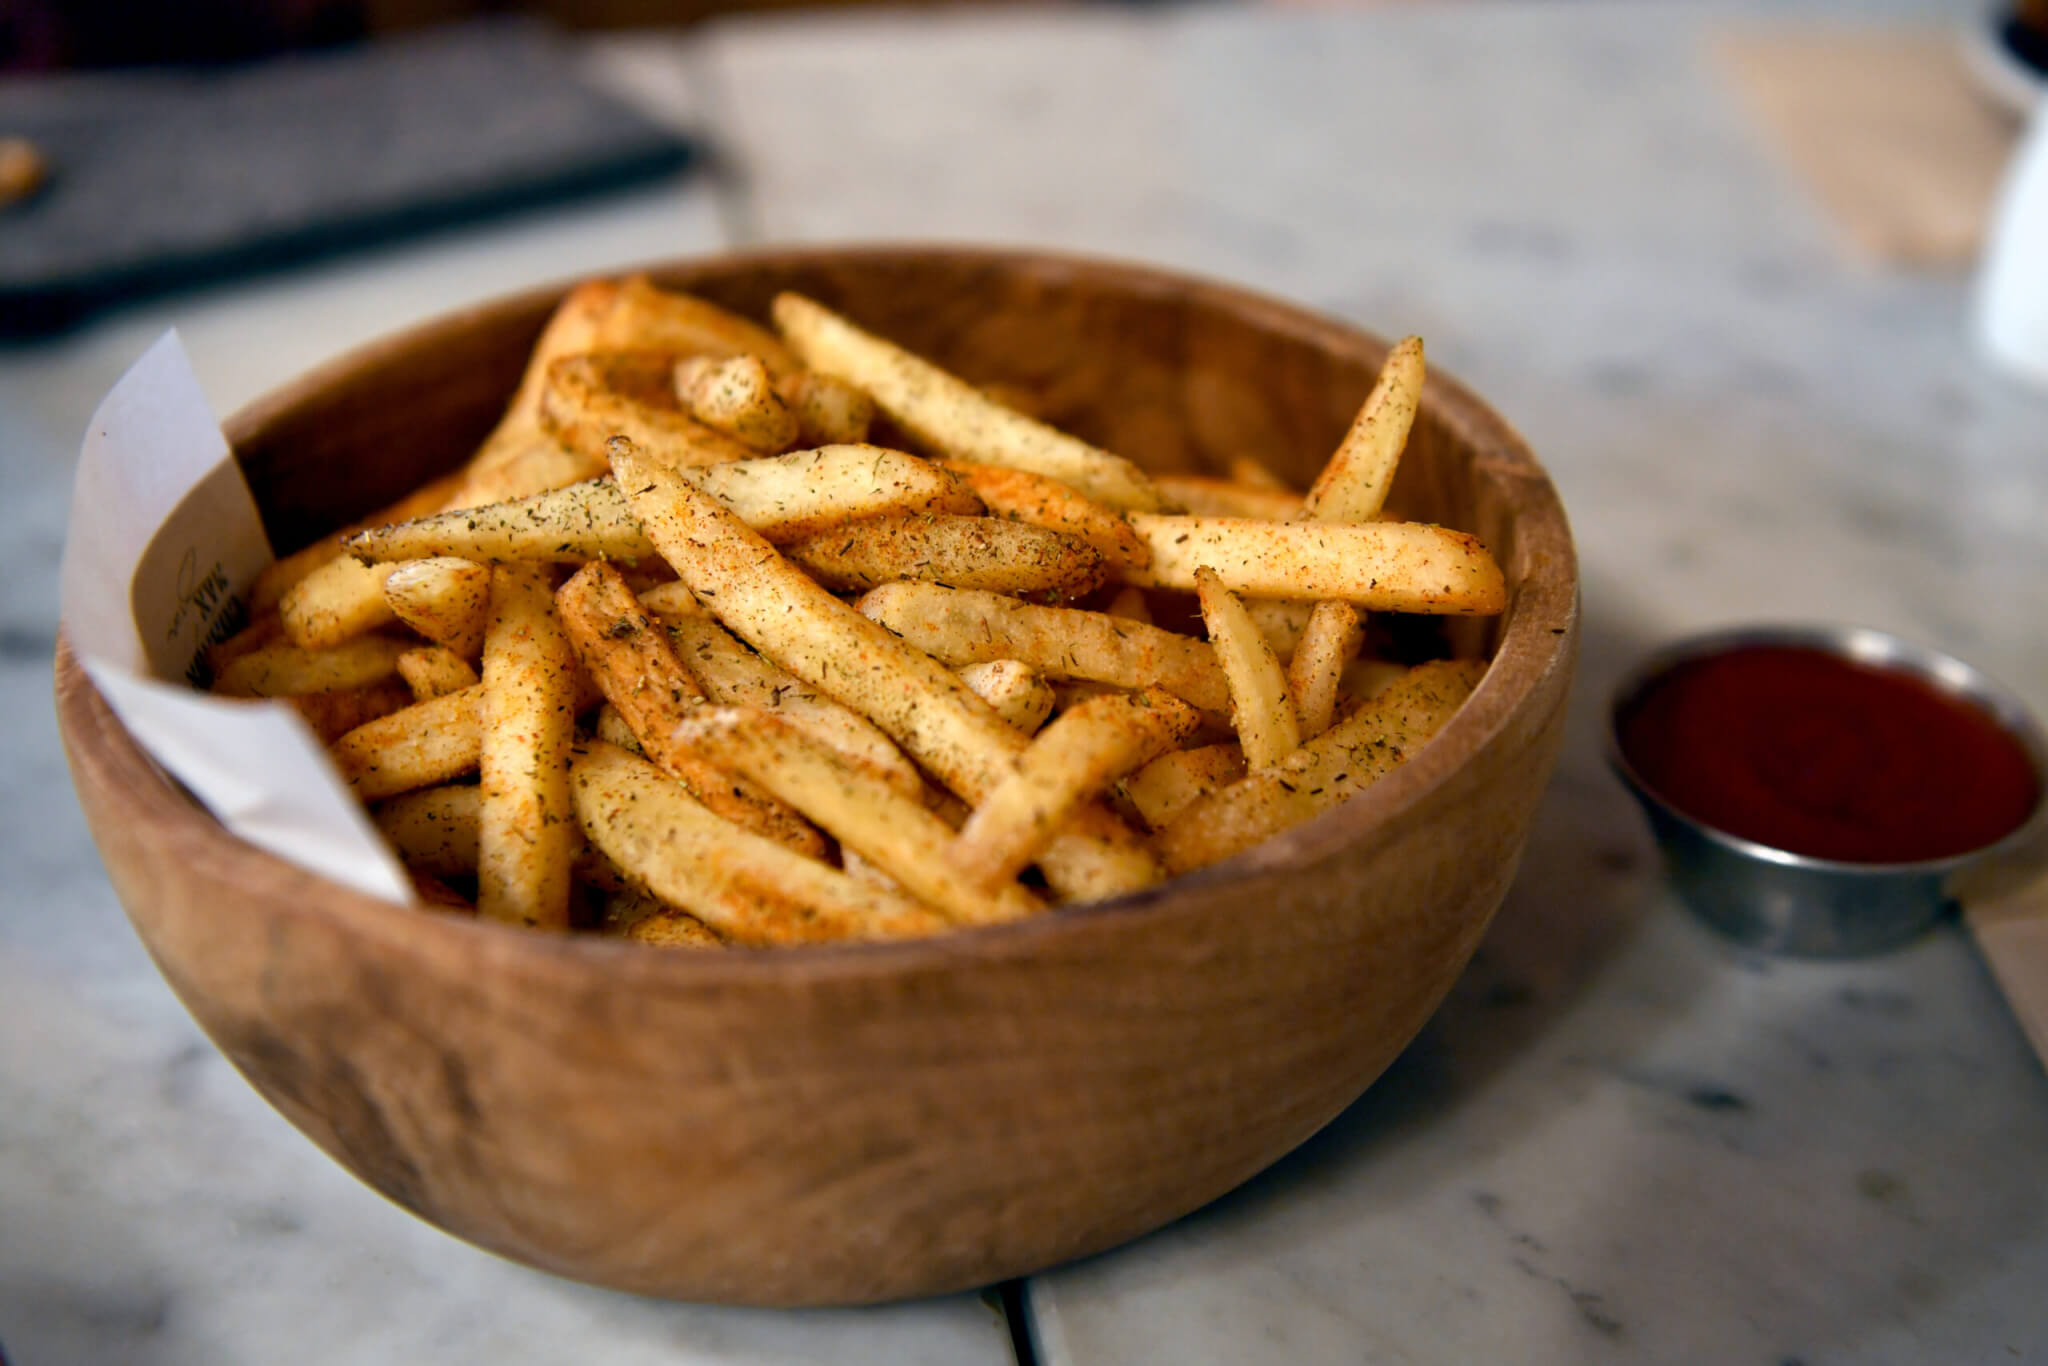 French fries served in a bowl in a restaurant